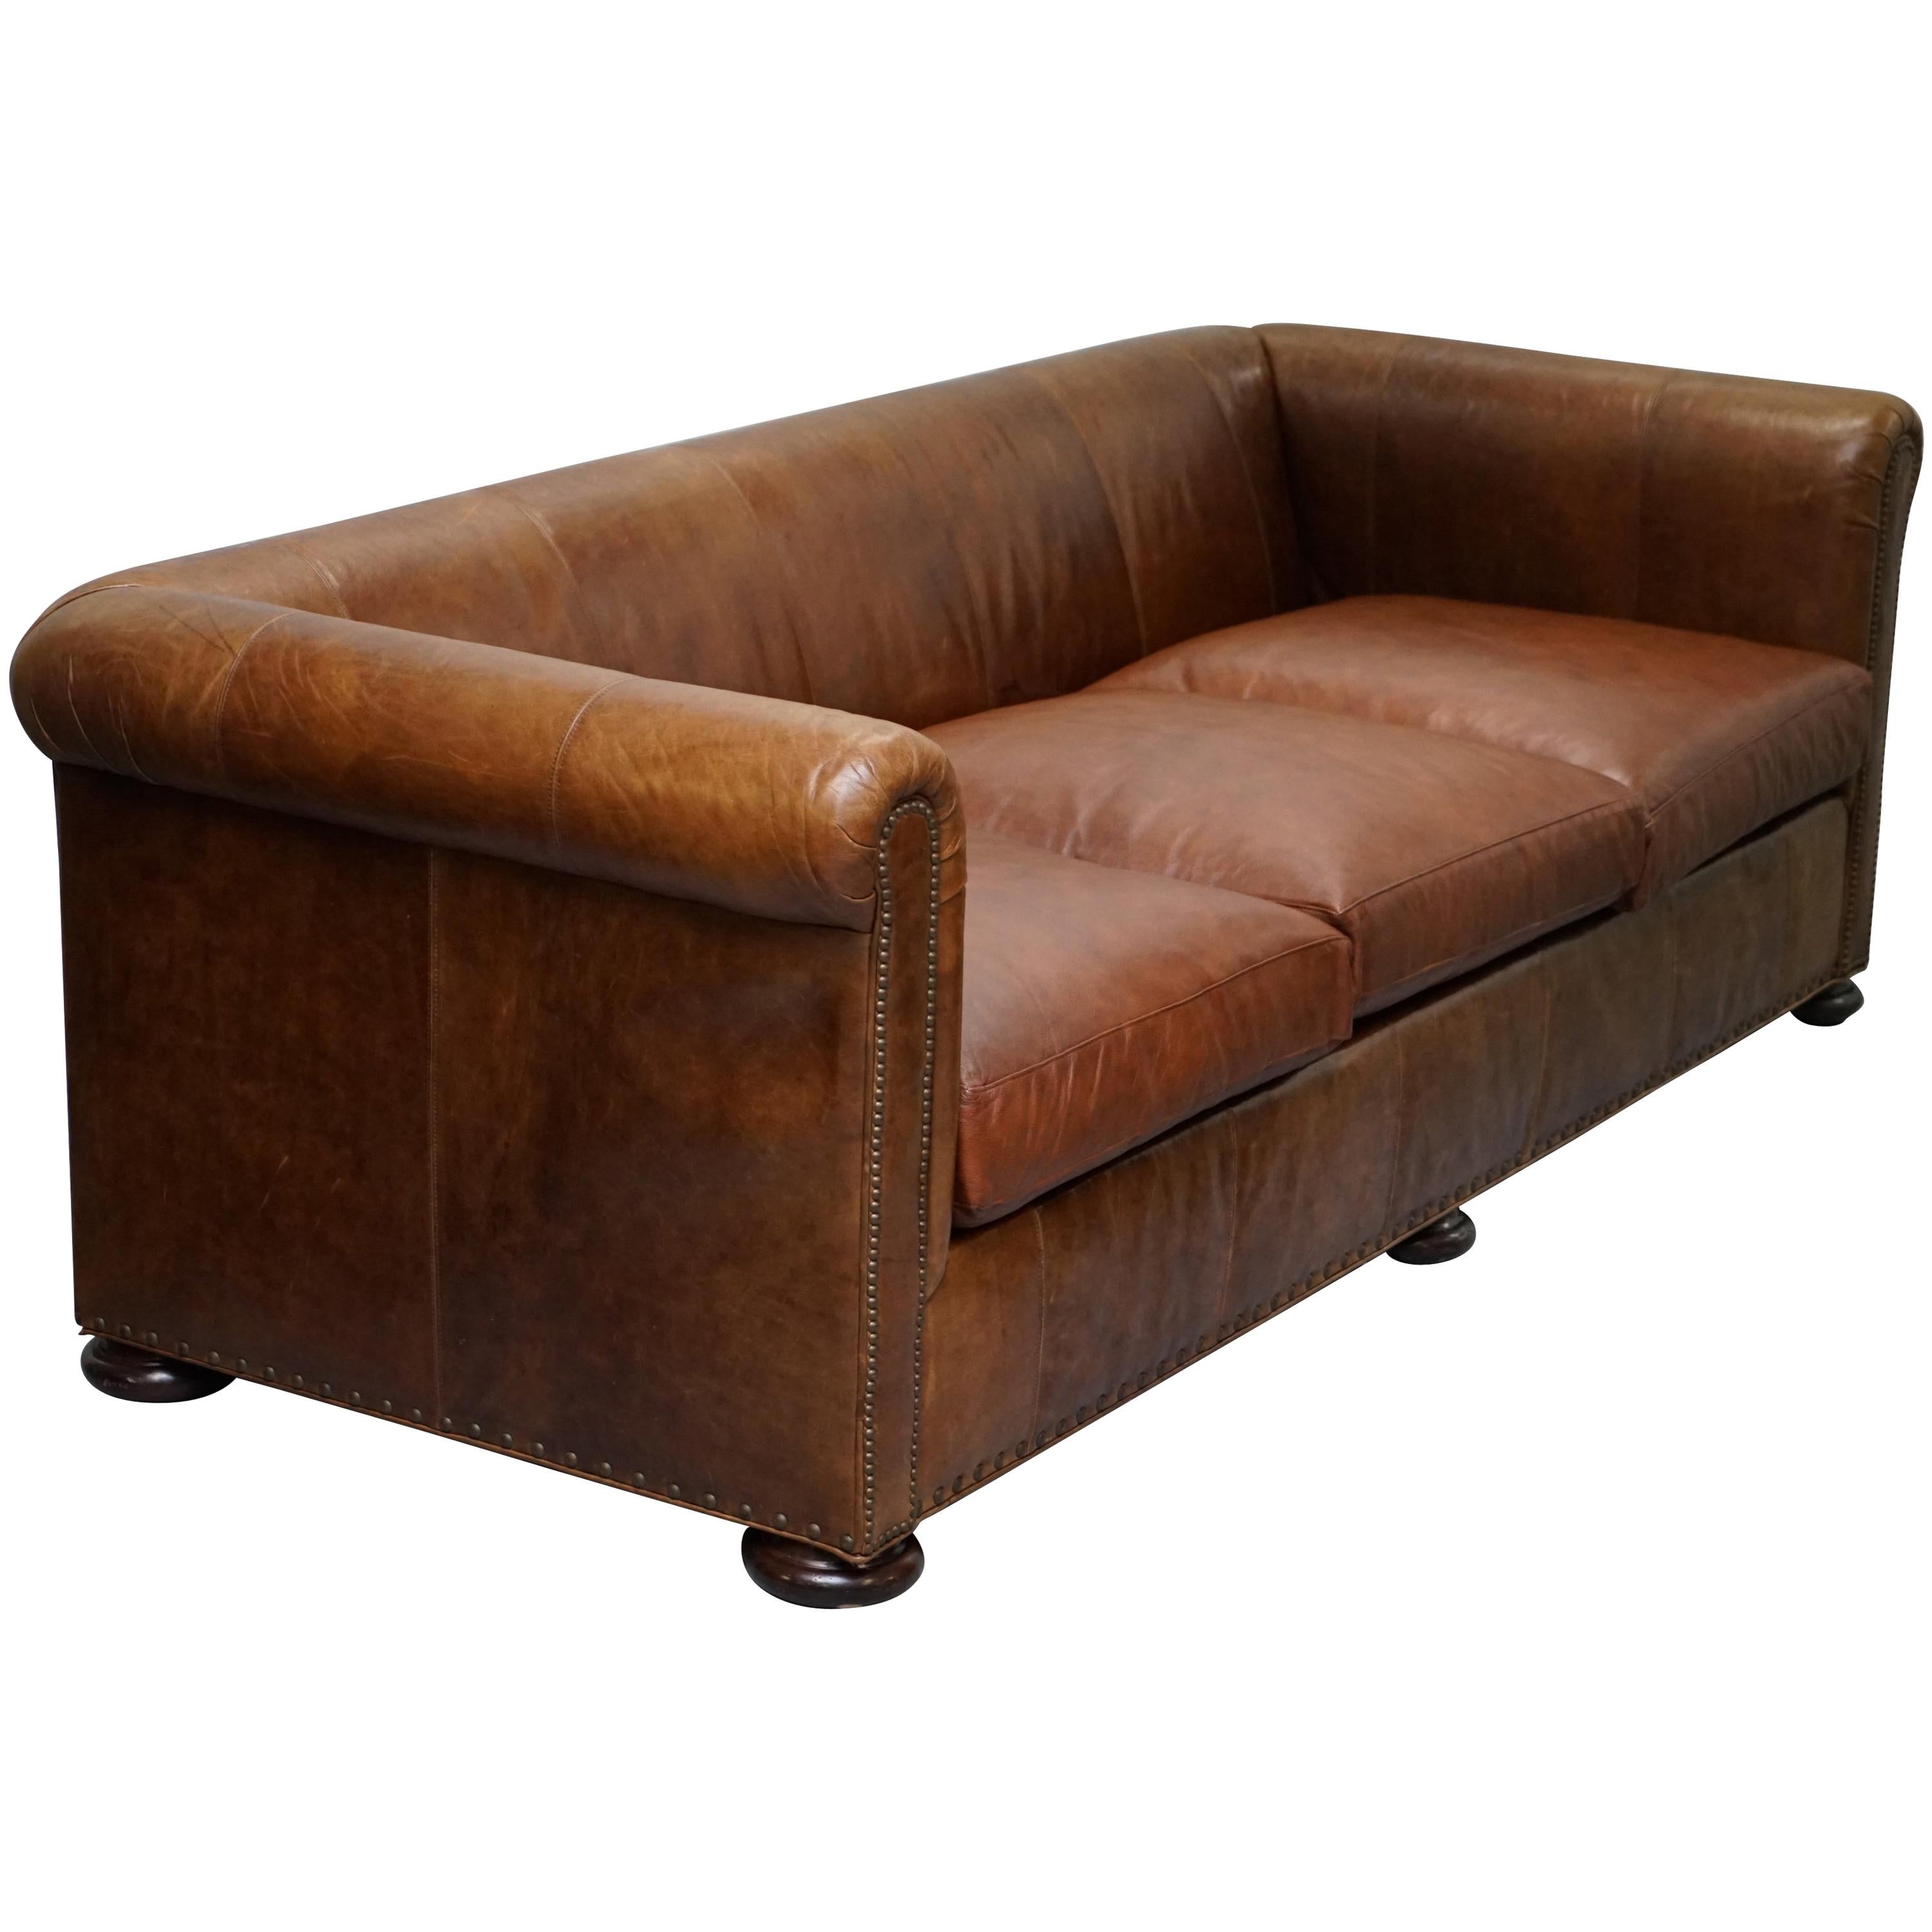 Large Lillian August Brown Leather Three to Four Seat Contemporary Sofa